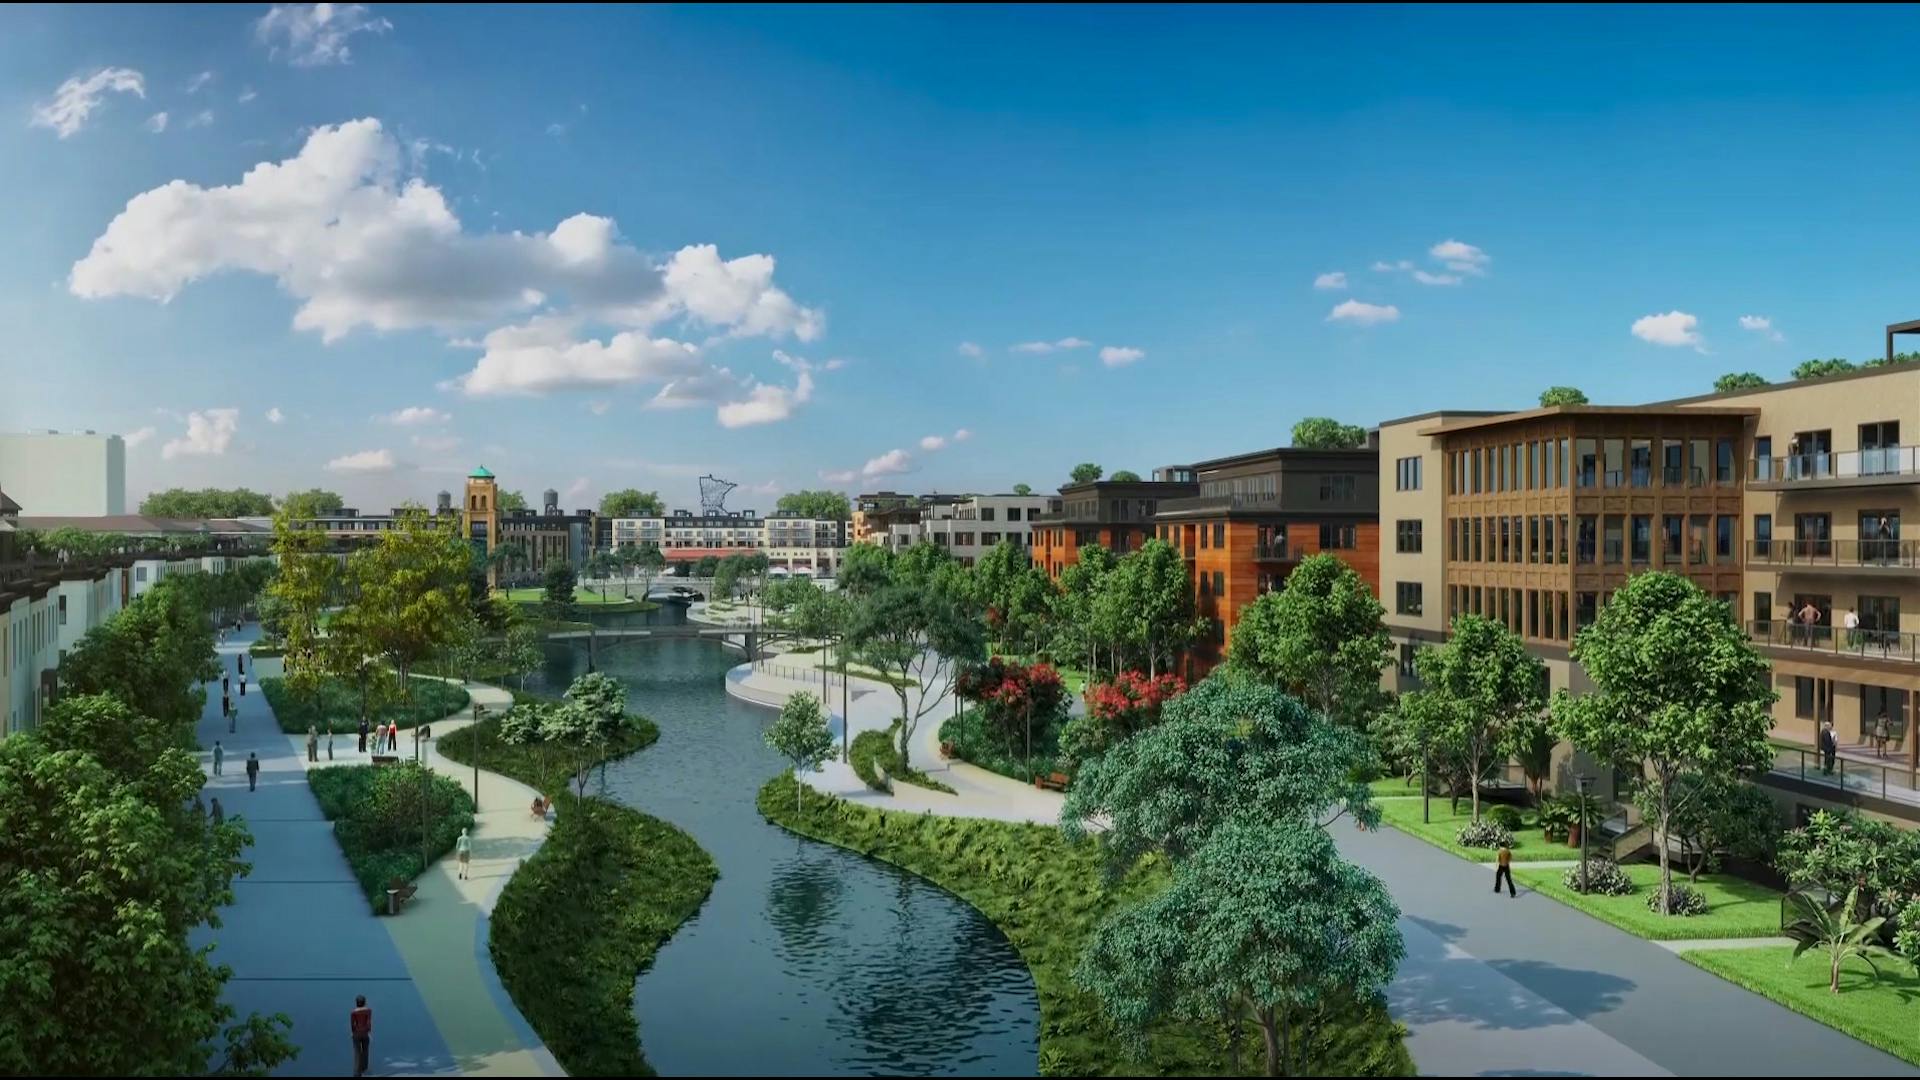 Mixed-use village will include affordable housing, green space.